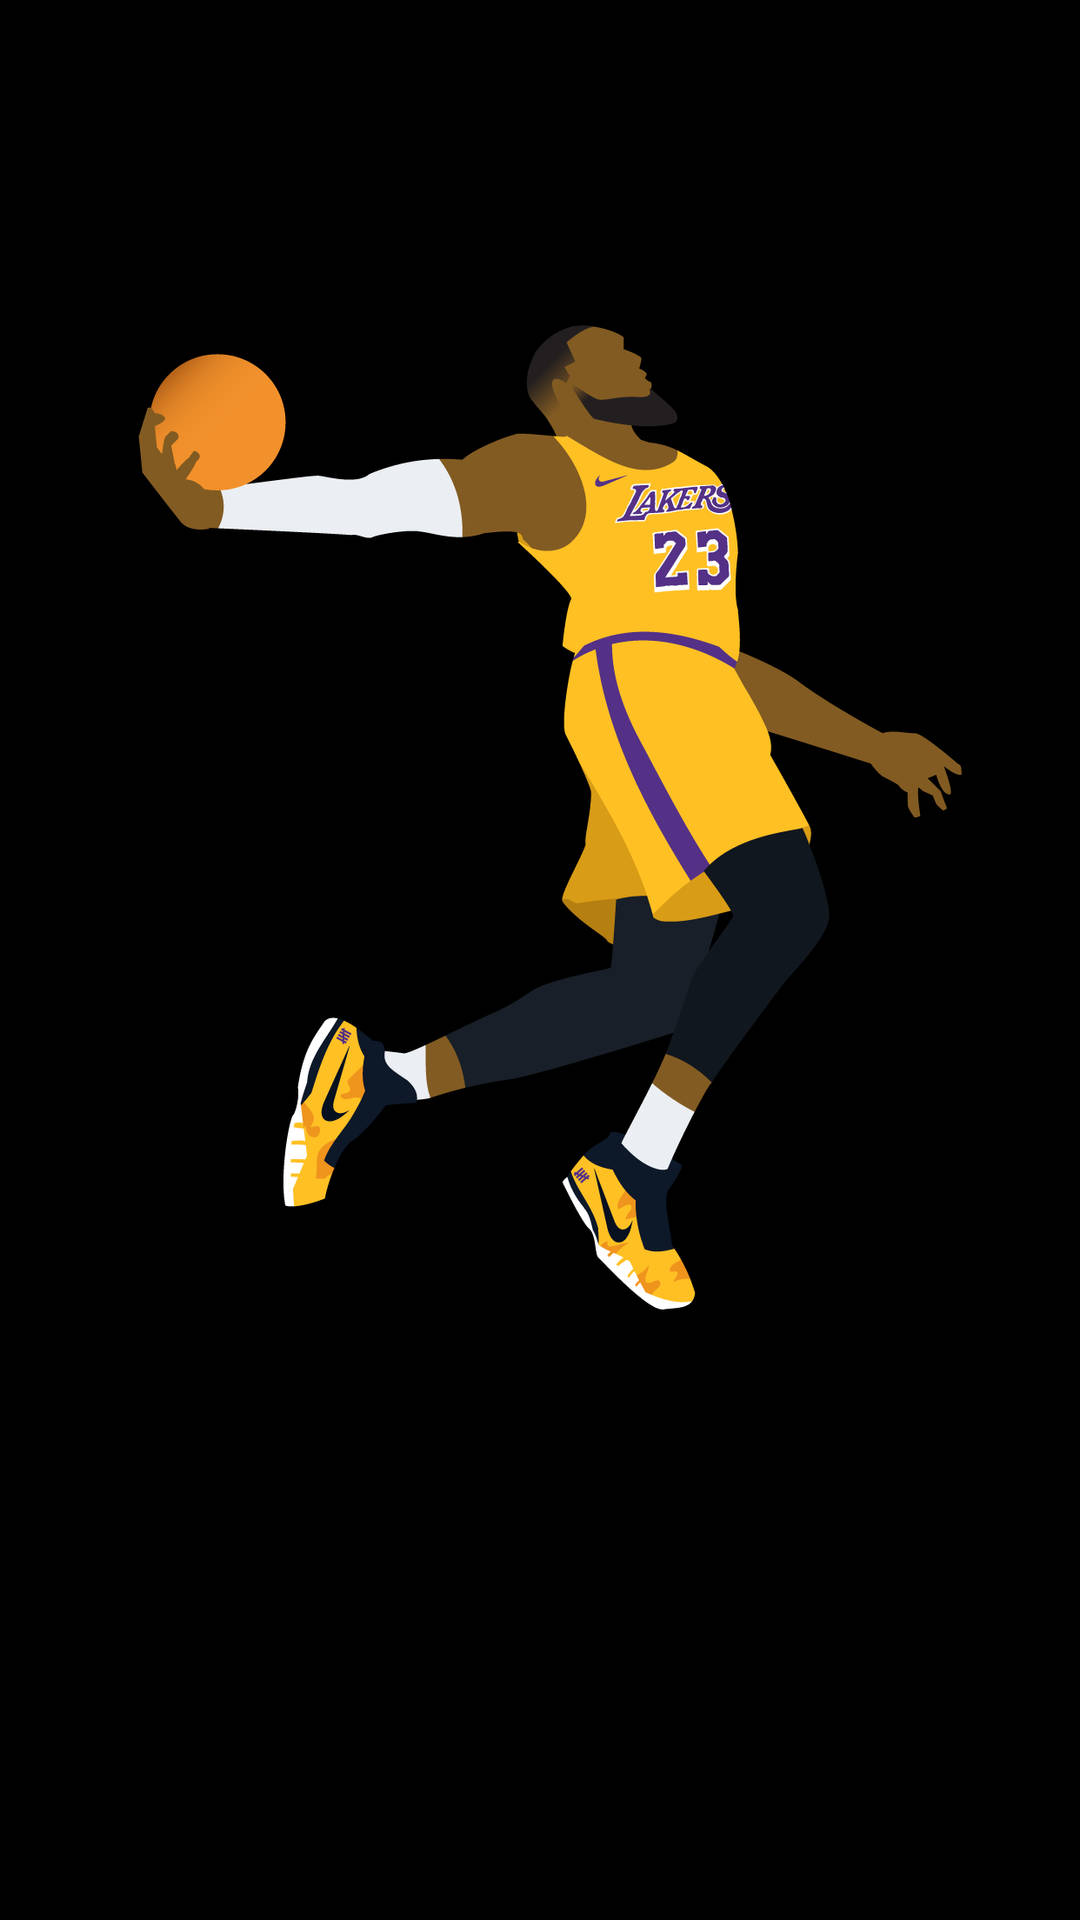 Showing off your Lakers pride with an official Lakers iPhone Wallpaper